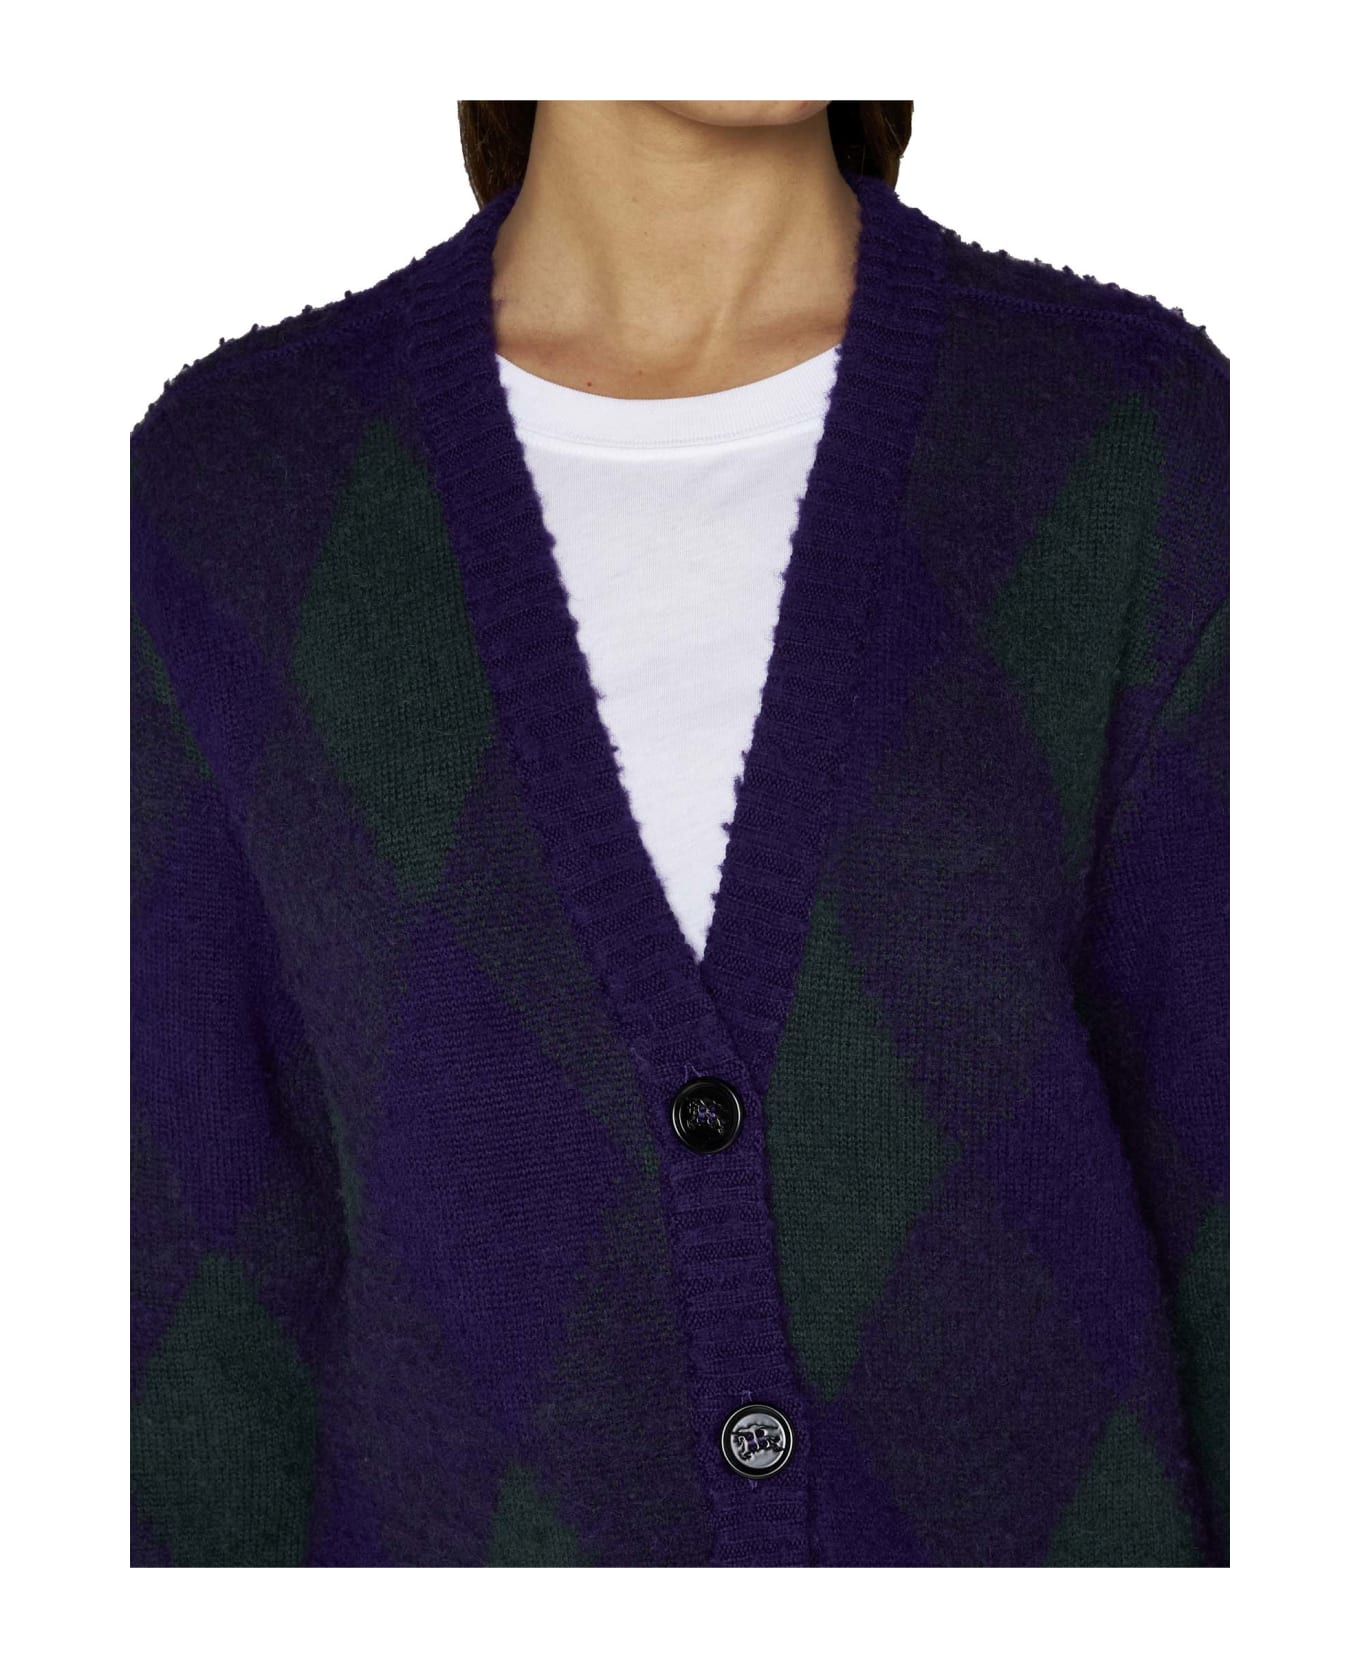 Burberry Purple Cardigan With Argyle Motif In Wool Woman - ROYAL IP PATTERN